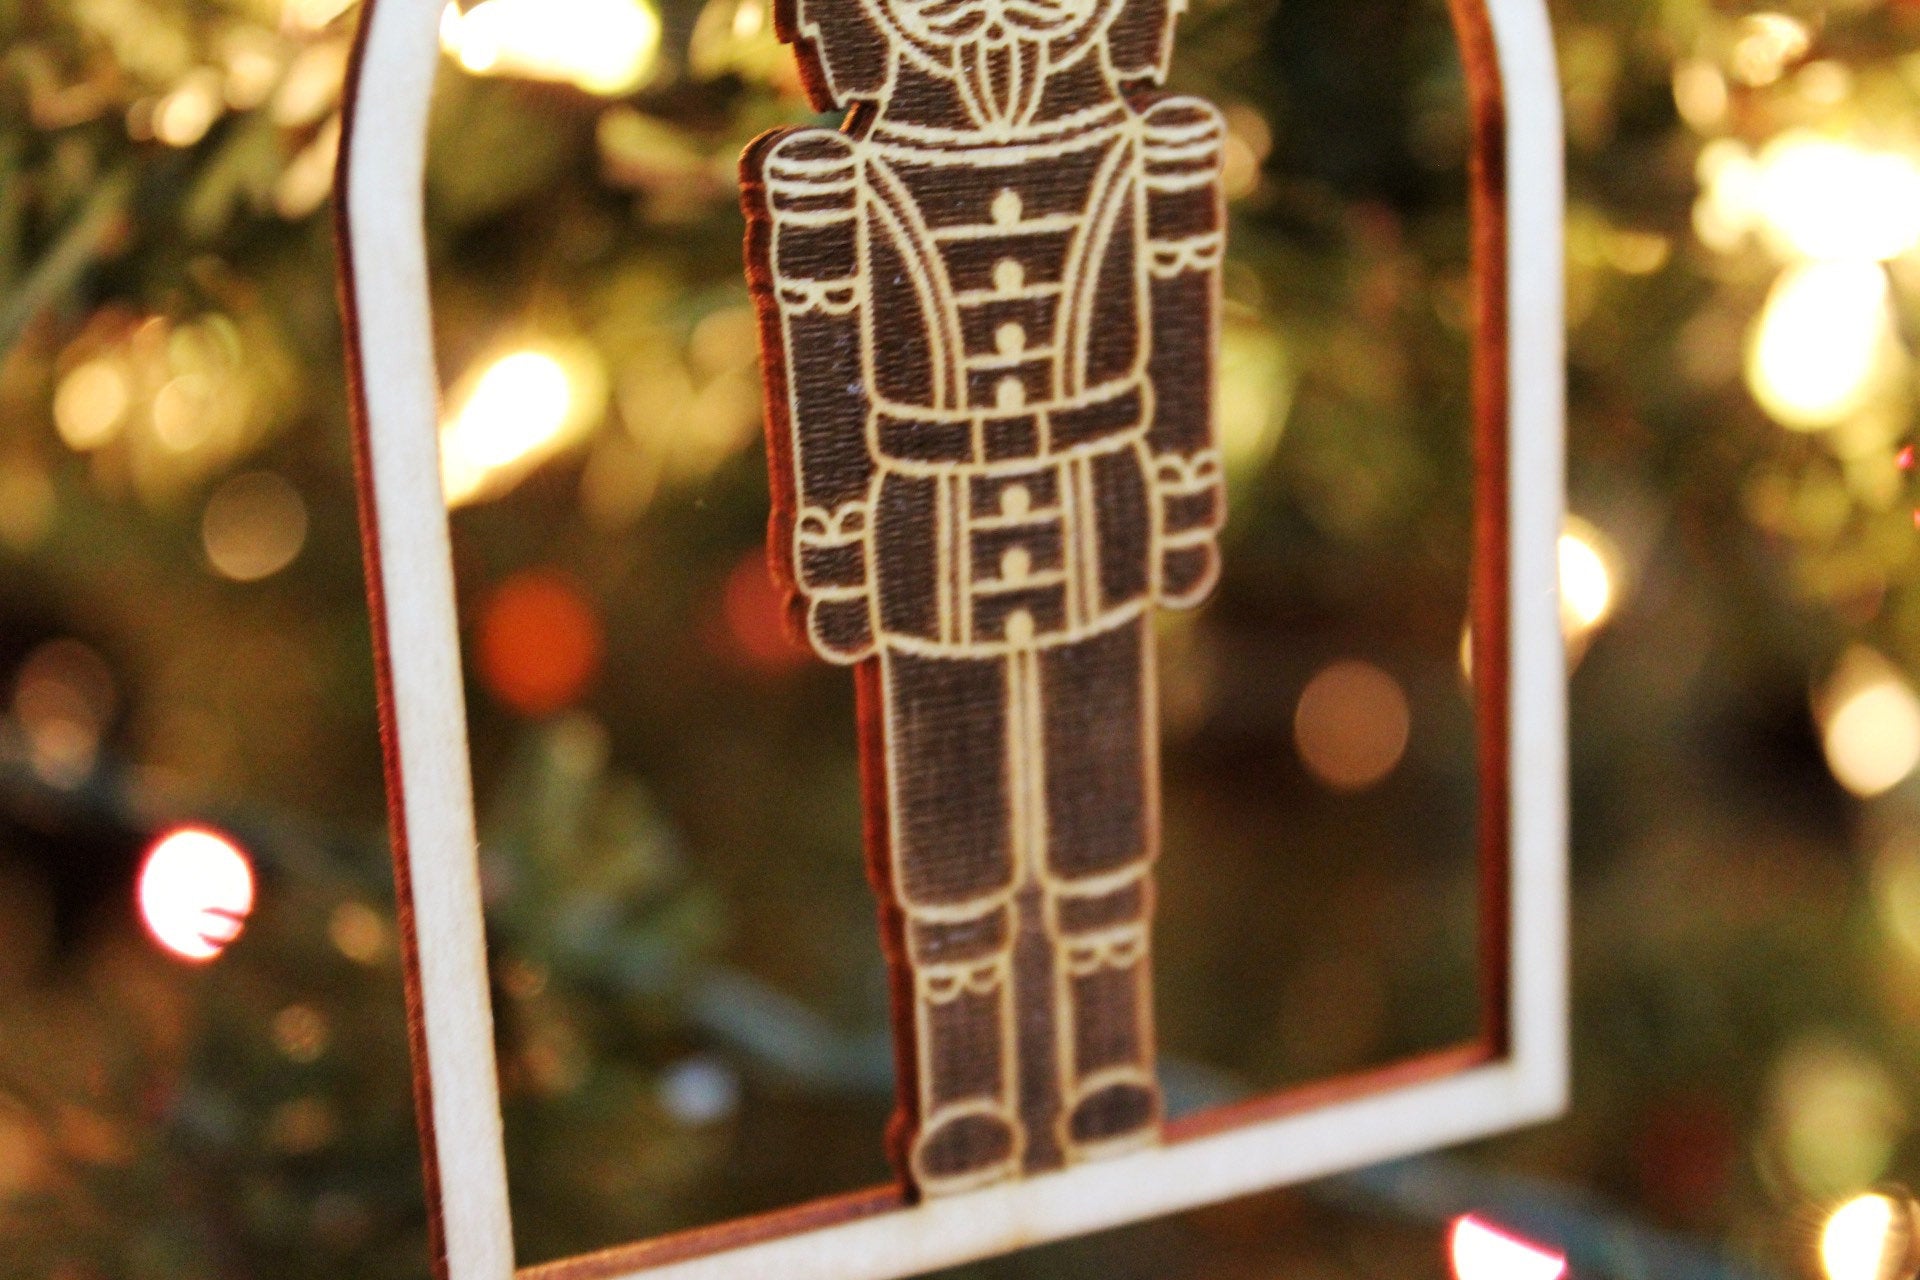 NutCracker Wooden Christmas Ornament Gift, Nutcrackers Toy Soldier Ornament Gift For Her